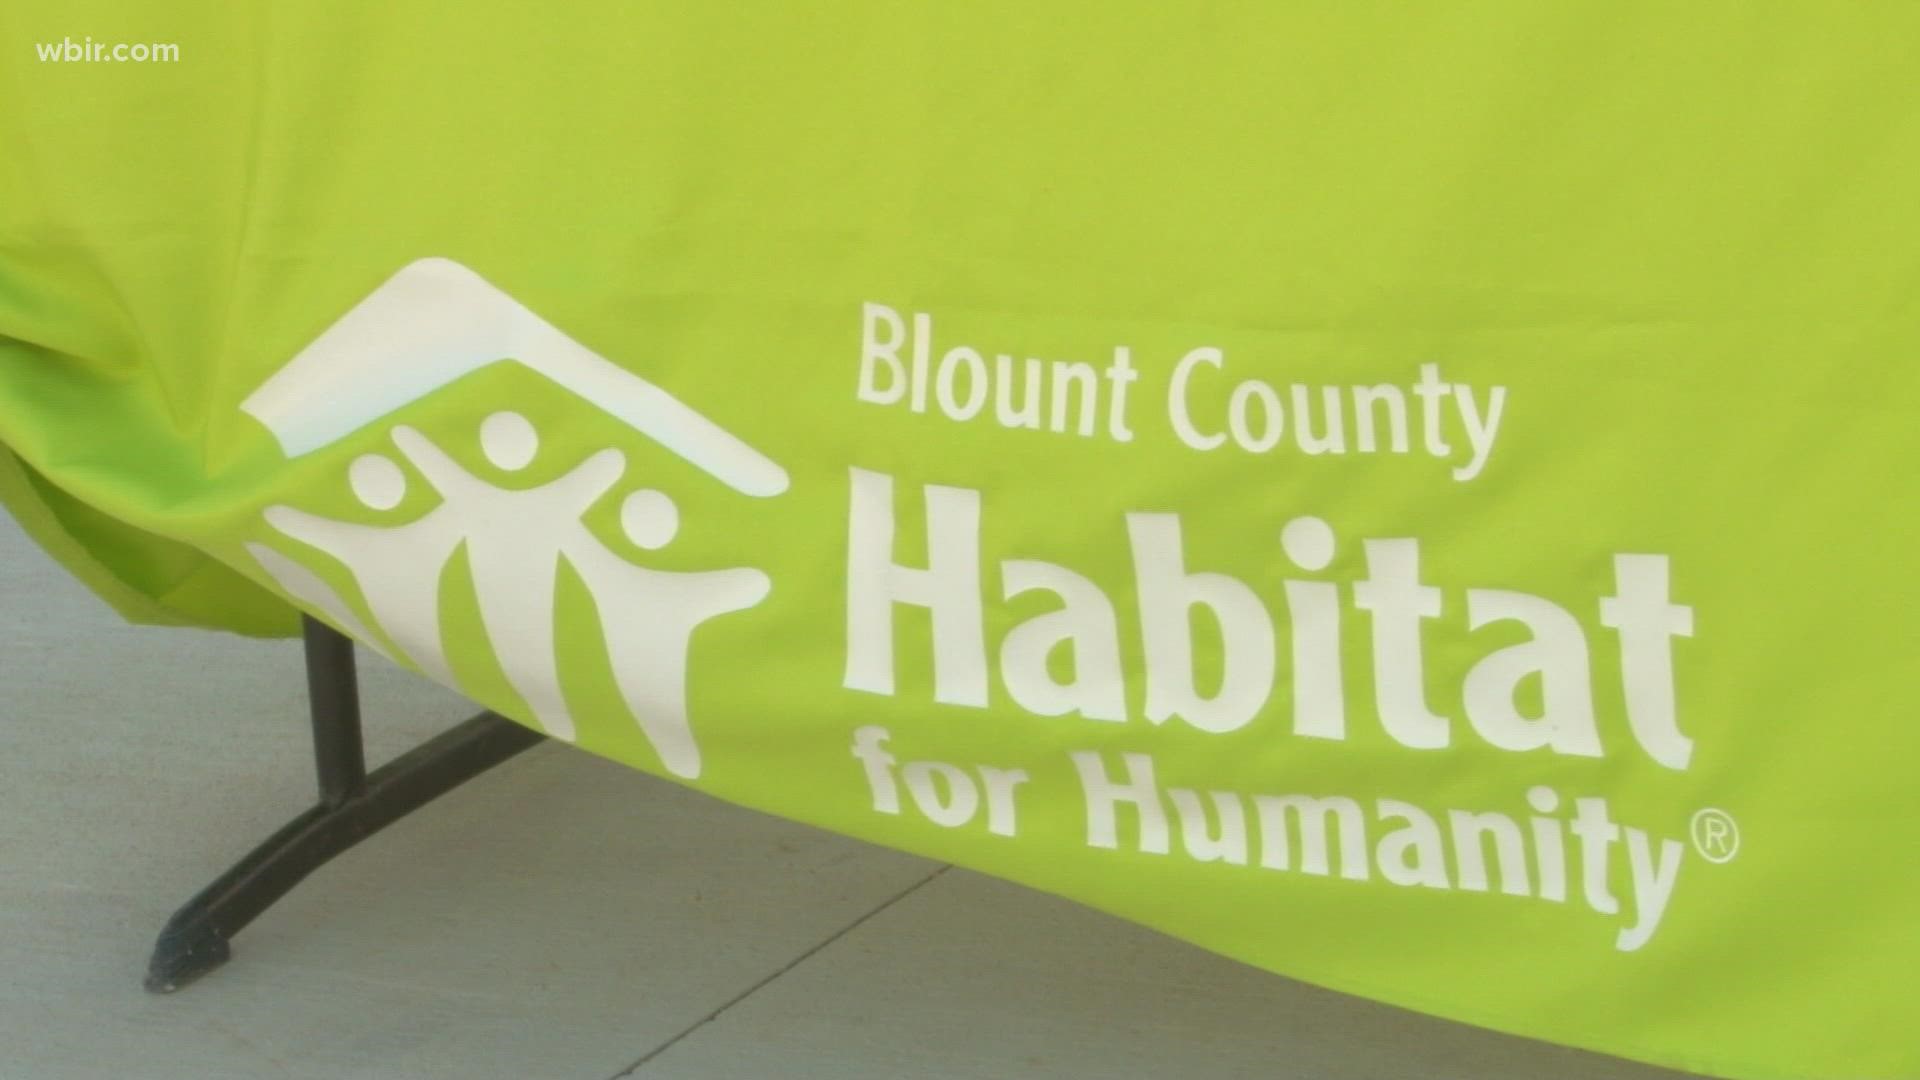 Blount County Habitat for Humanity dedicated one of the homes to a single mother and her three children